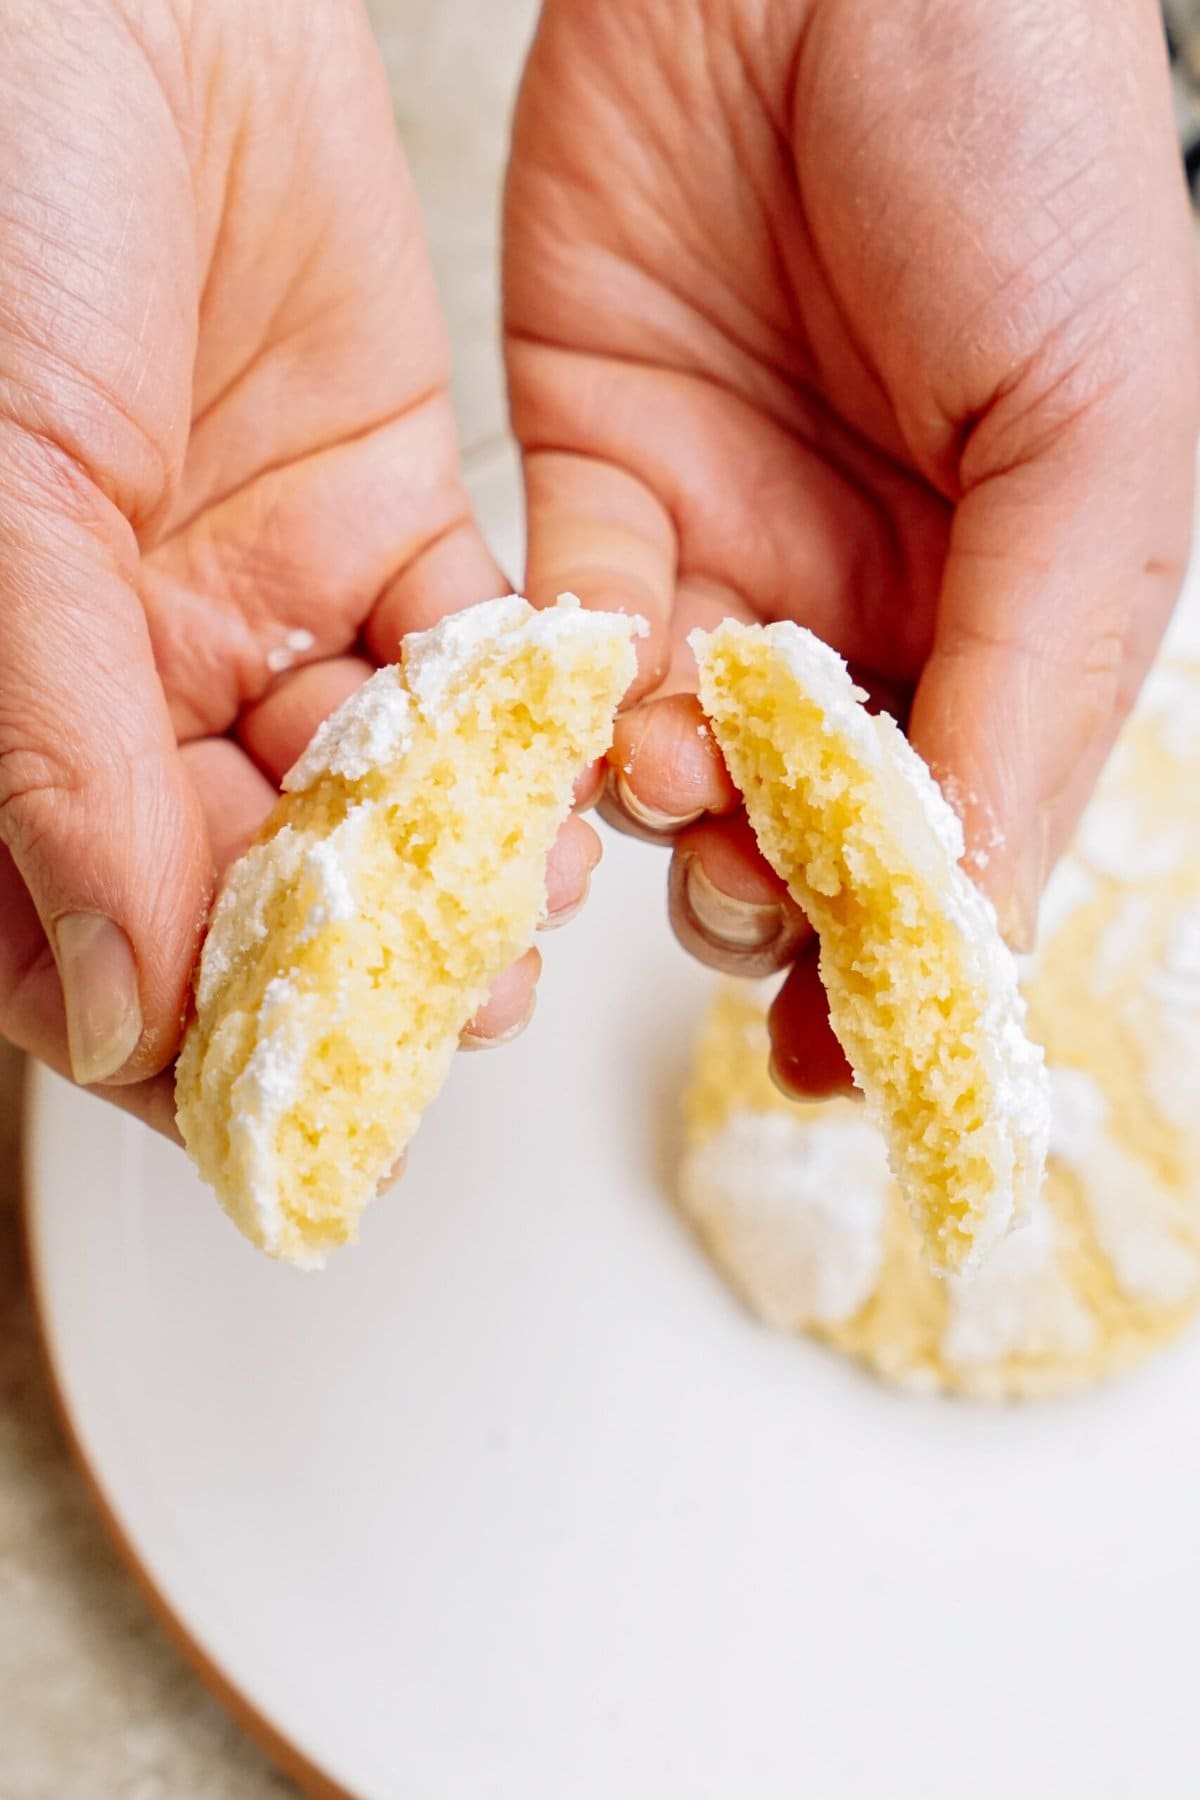 Hands breaking a powdered sugar-coated cookie in half to reveal the inside.